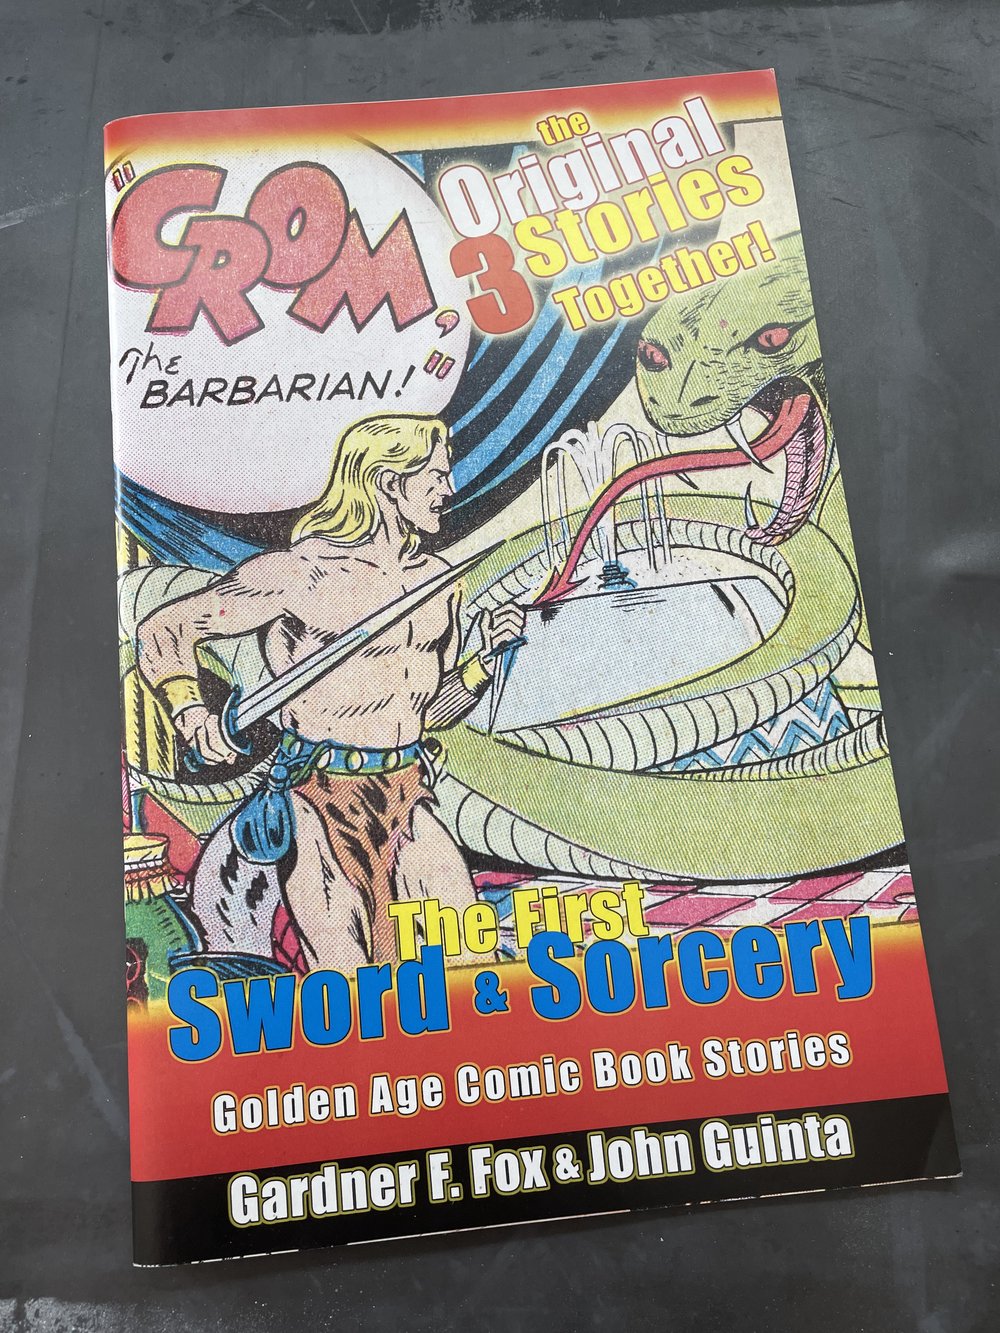 The Original 3 Golden Age Crom Comic Stories Collected - FULL COLOR!